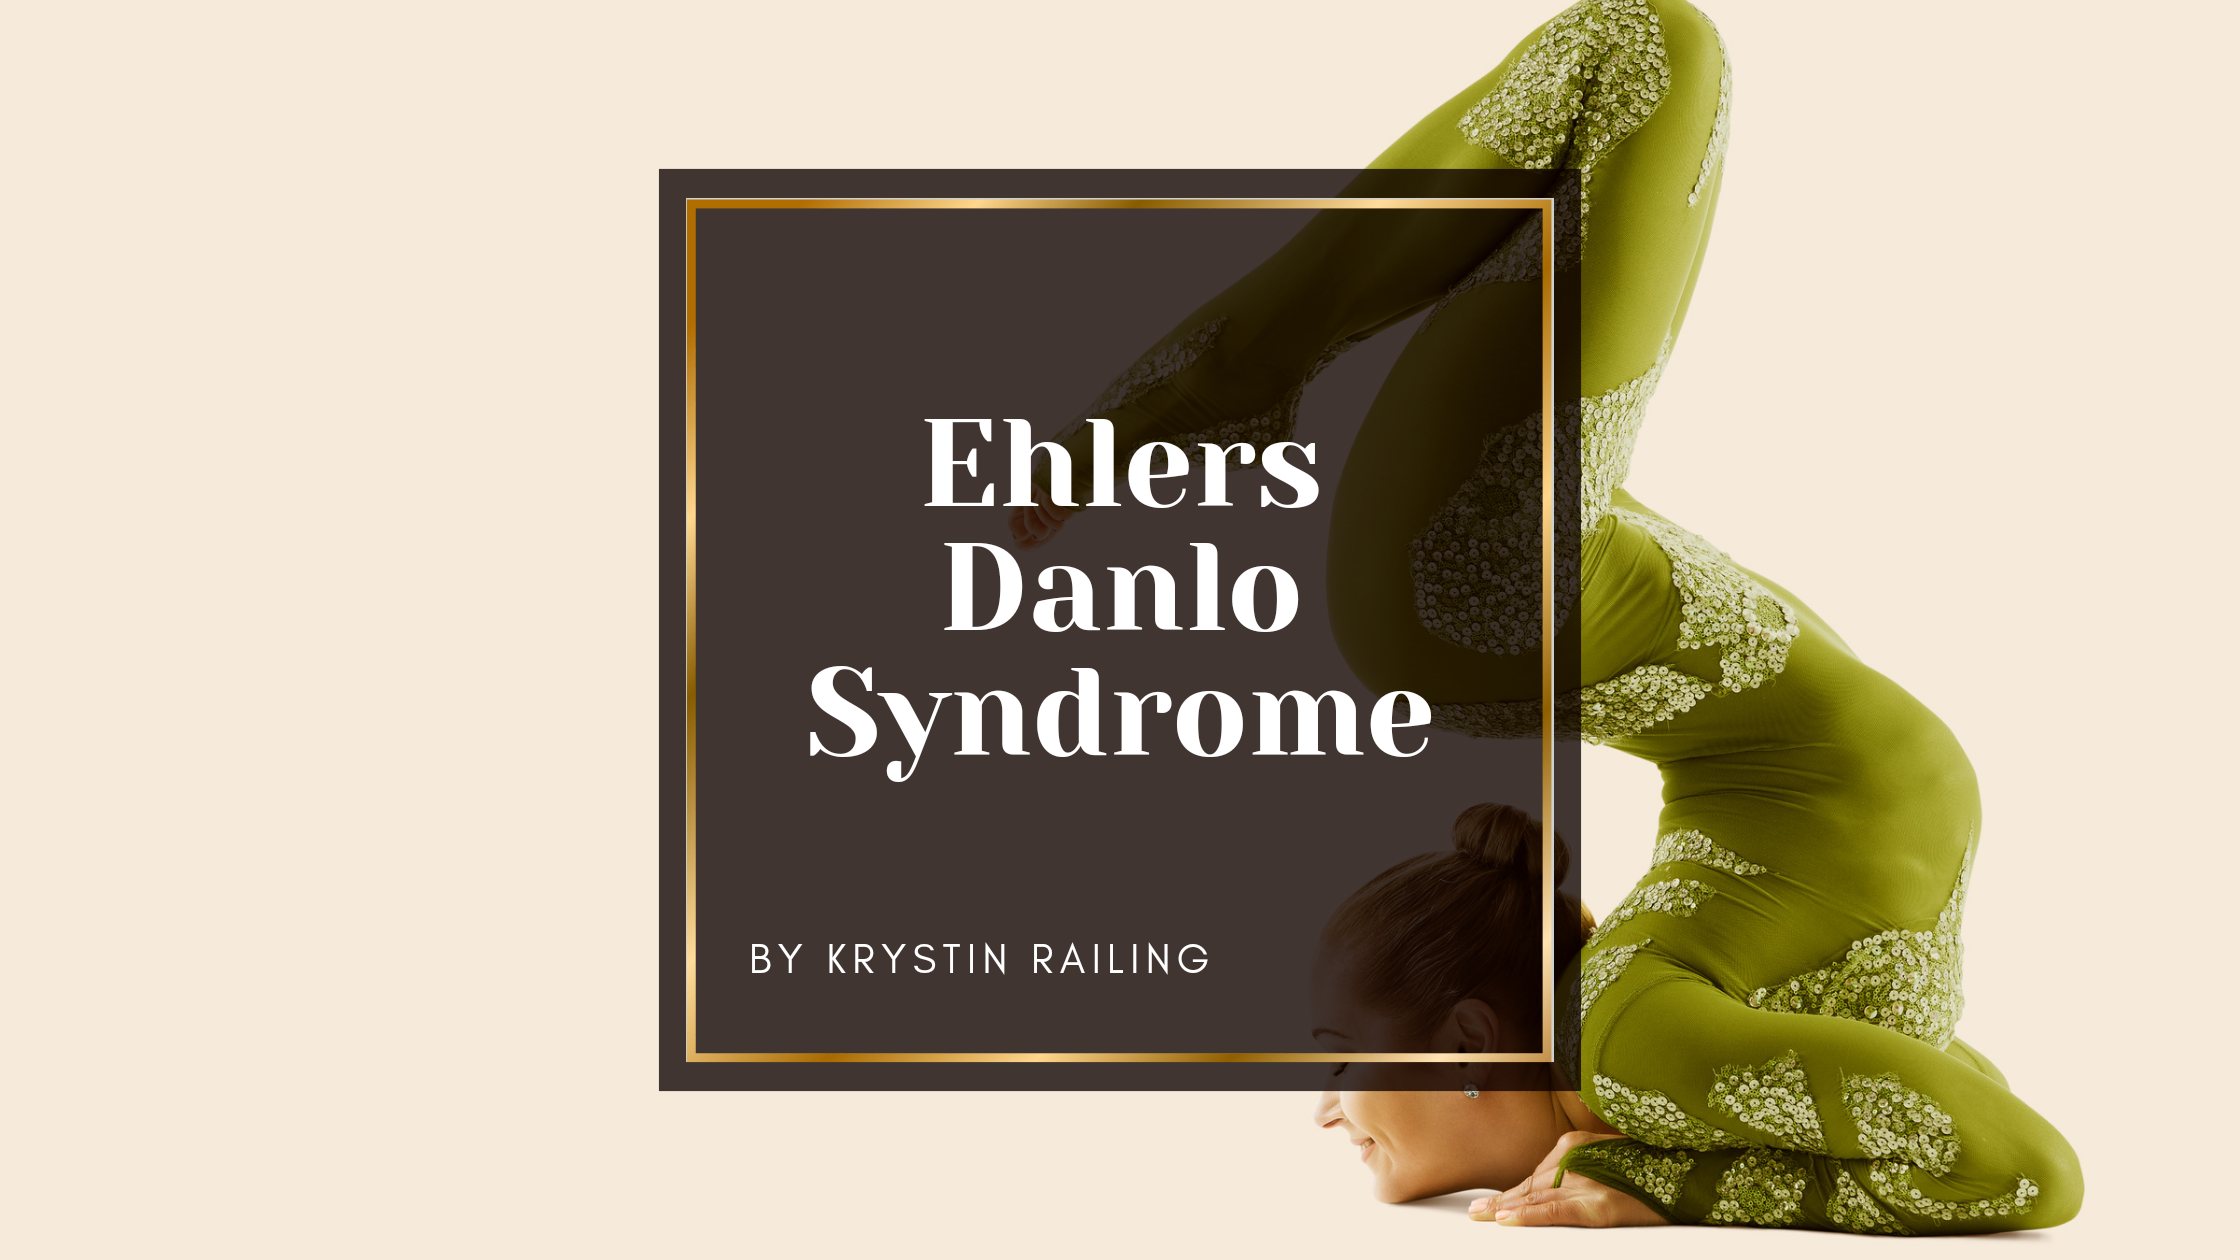 Performing with Ehlers Danlo Syndrome